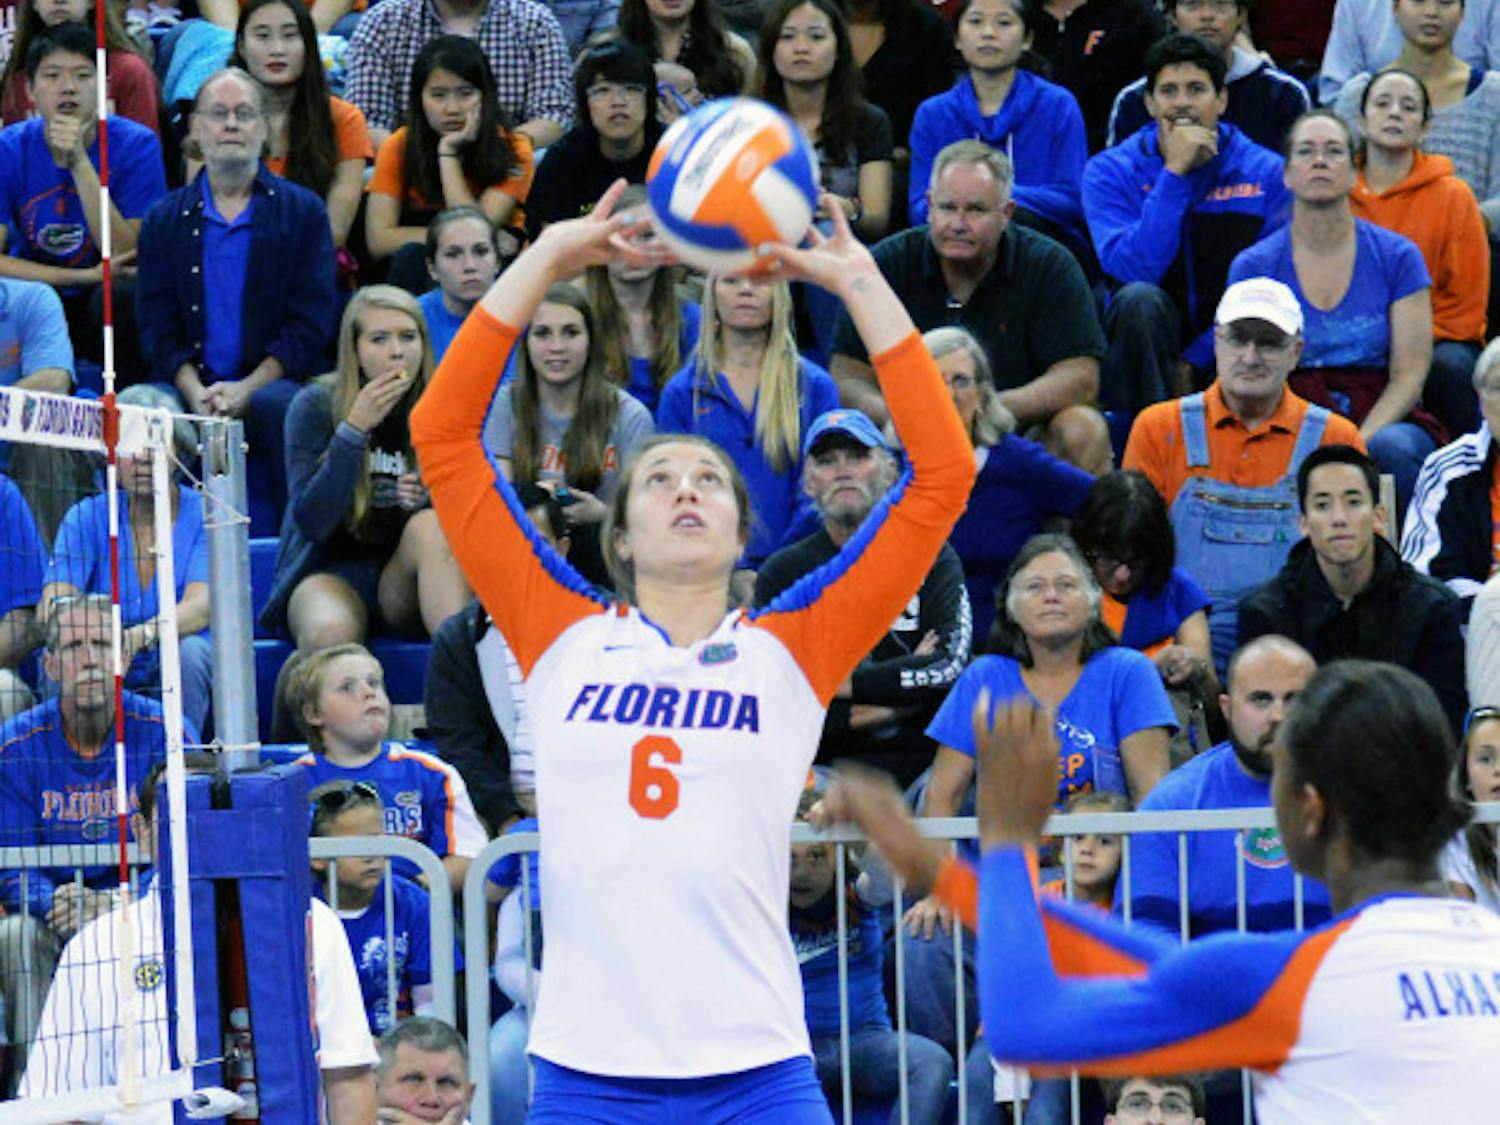 Mackenzie Dagostino sets the ball during Florida's 3-0 win against Alabama on Friday in the O'Connell Center.